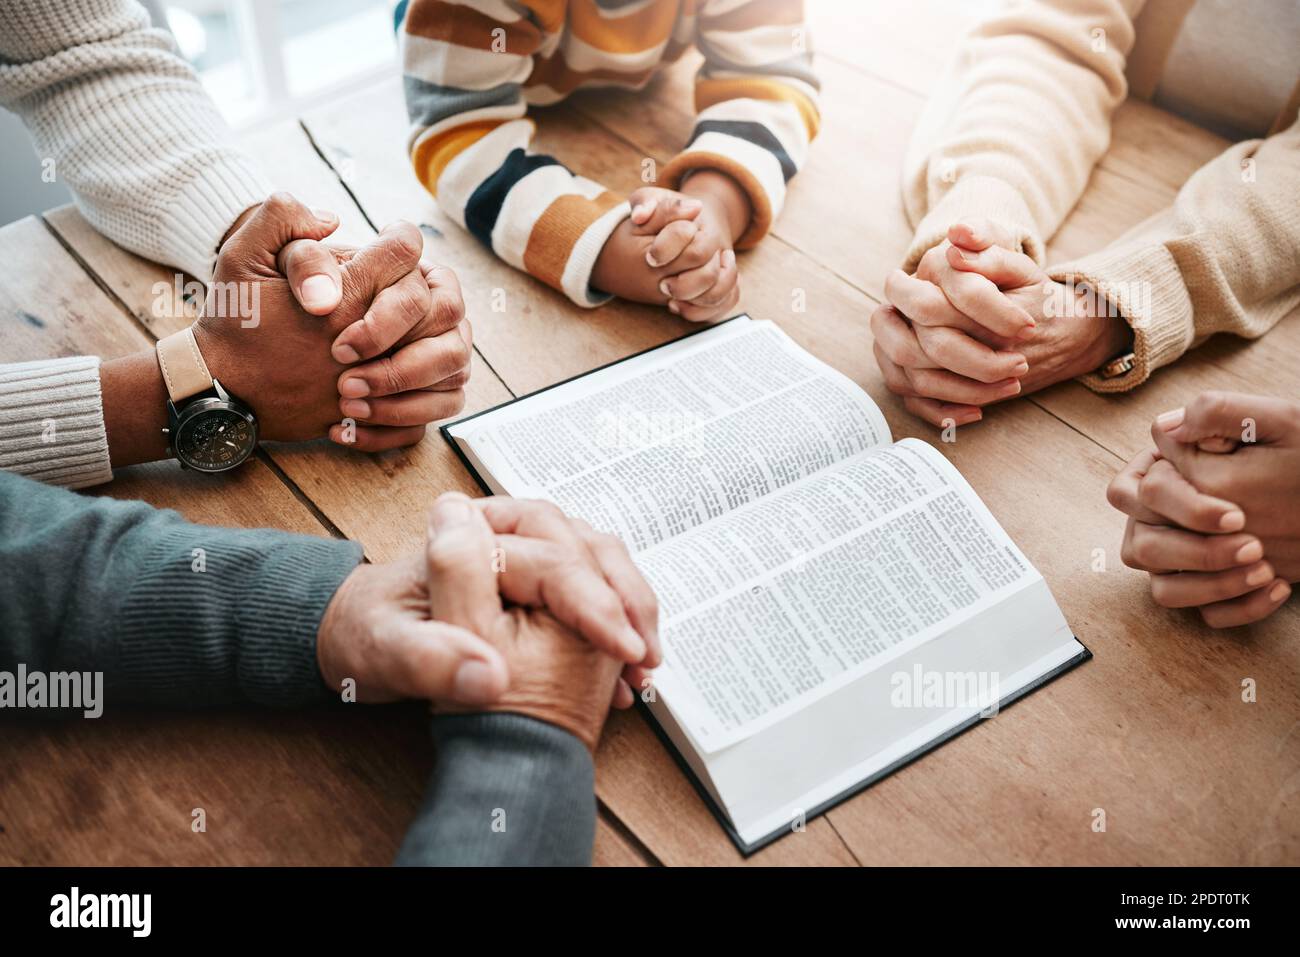 Bible, reading book or hands of big family praying for support or hope in Christian home for worship together. Mother, father or grandparents studying Stock Photo